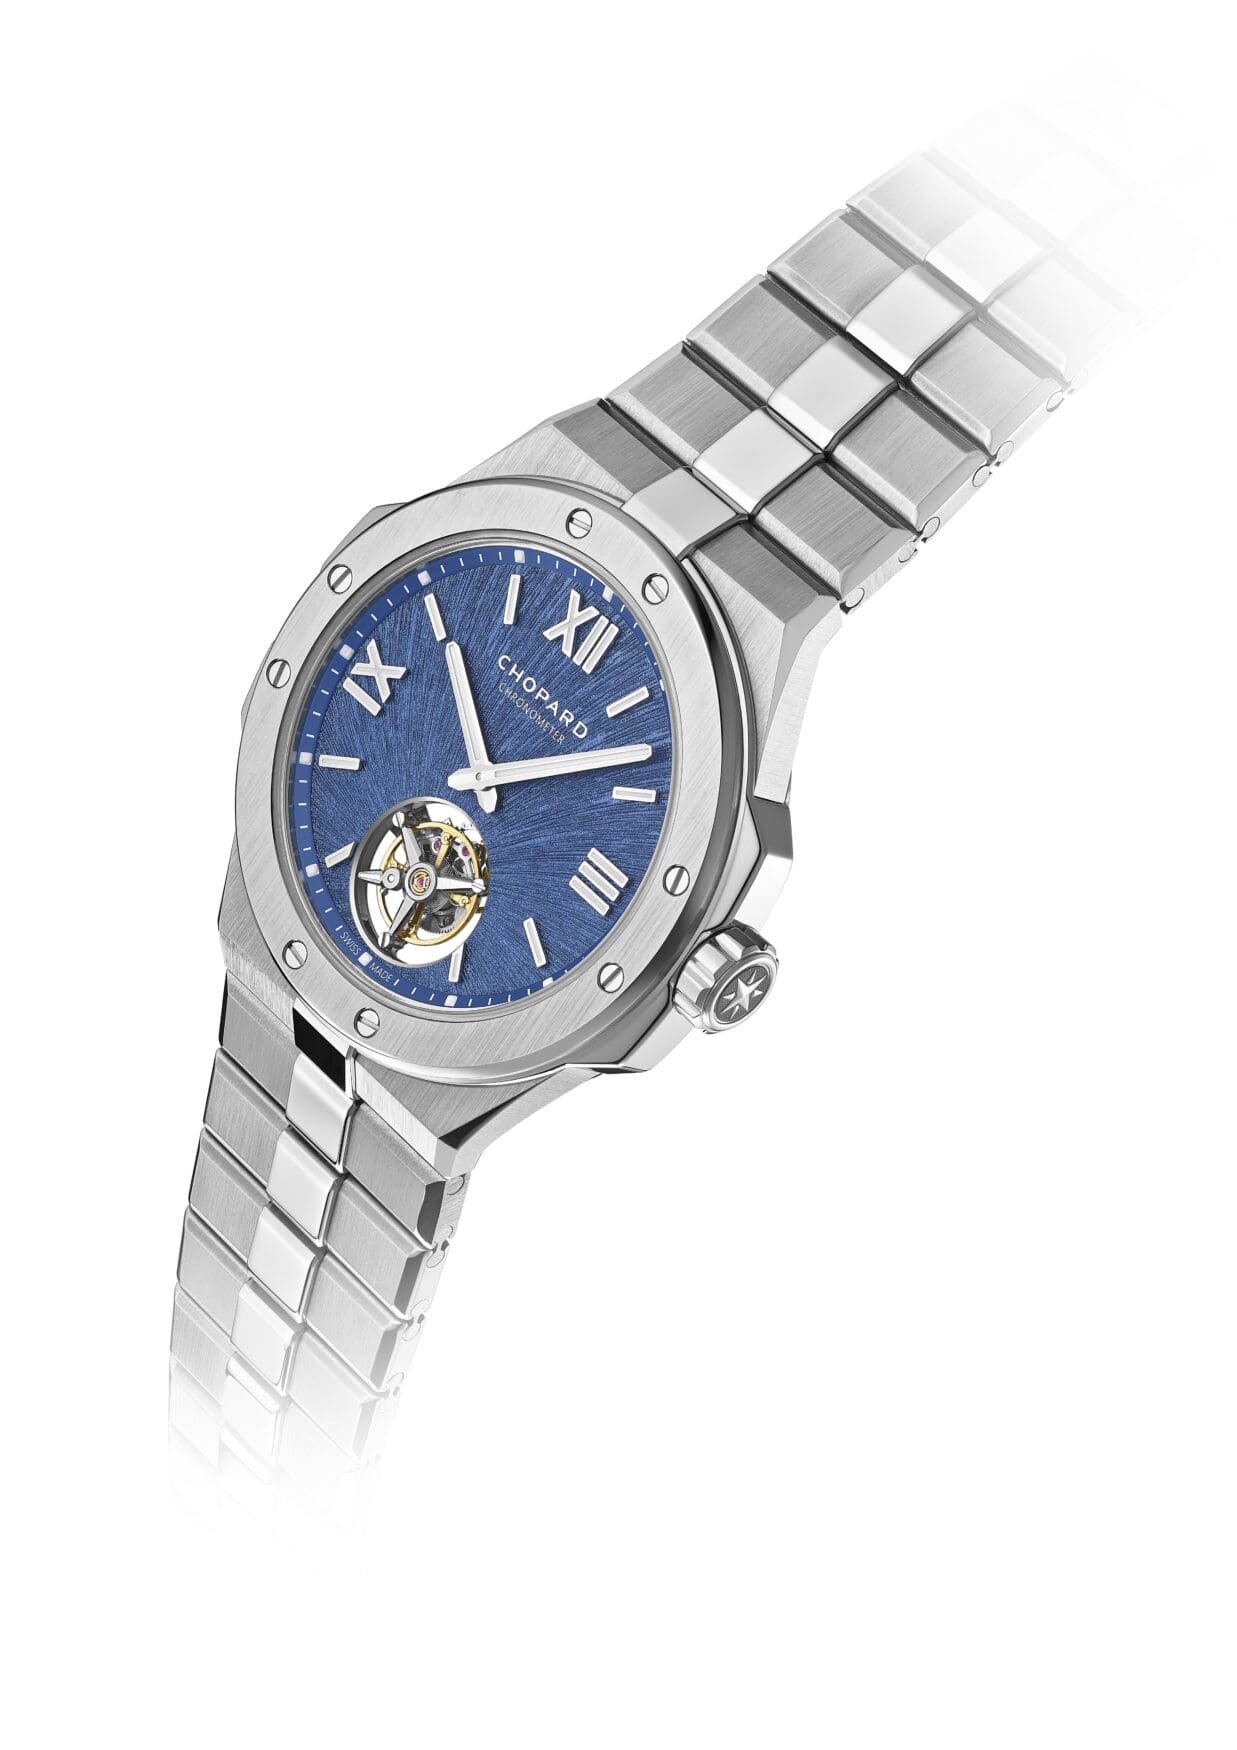 WATCHES & WONDERS: Chopard collection overview